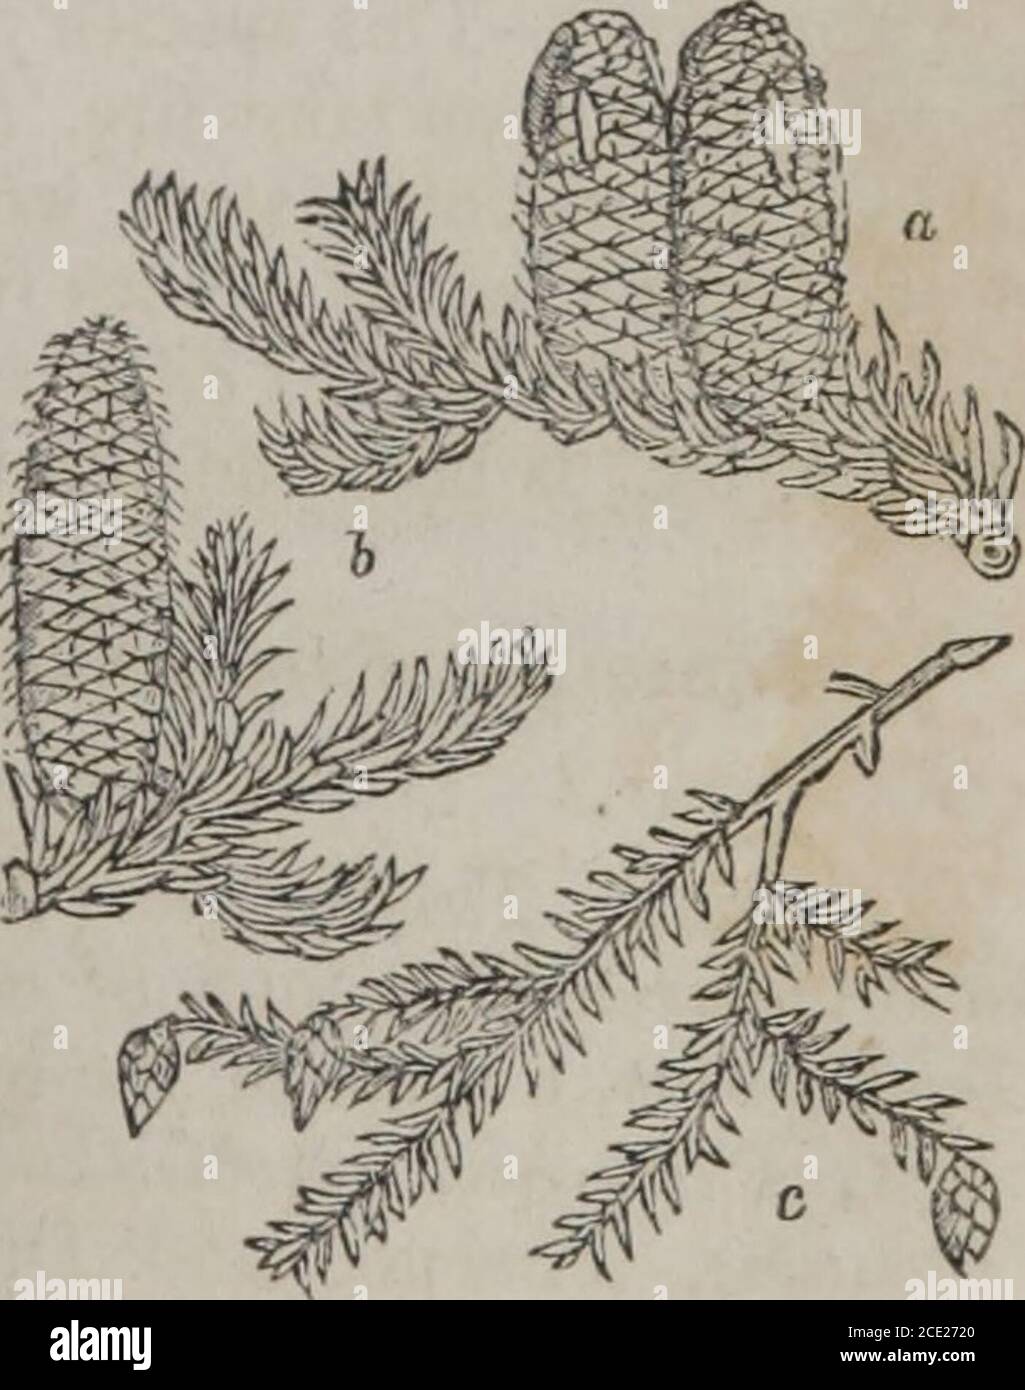 . The elements of materia medica and therapeutics (Volume 2) . a. jibies Picea. b. Jibies Balsamea.e. jibies Canadensis. Abies excelsa. 172 ELEMENTS OF MATERIA MEDICA. live of Germany, Russia, Norway, and other parts of Europe; also of the northernparts of Asia. Commonly cultivated in England. Flowers in May and June. Avery lofty tree, growing sometimes to the height of 150 feet. It yields, by spon-taneous exudation, Common Frankincense (Abietis resina, L.; Thus, D.), fromwhich is prepared Burgundy Pitch (Pix Abietina, L., Fix Burgundica, E. D.)(Pix Abietis, U. S.) 2. Abies Balsamea, Lindley, Stock Photo